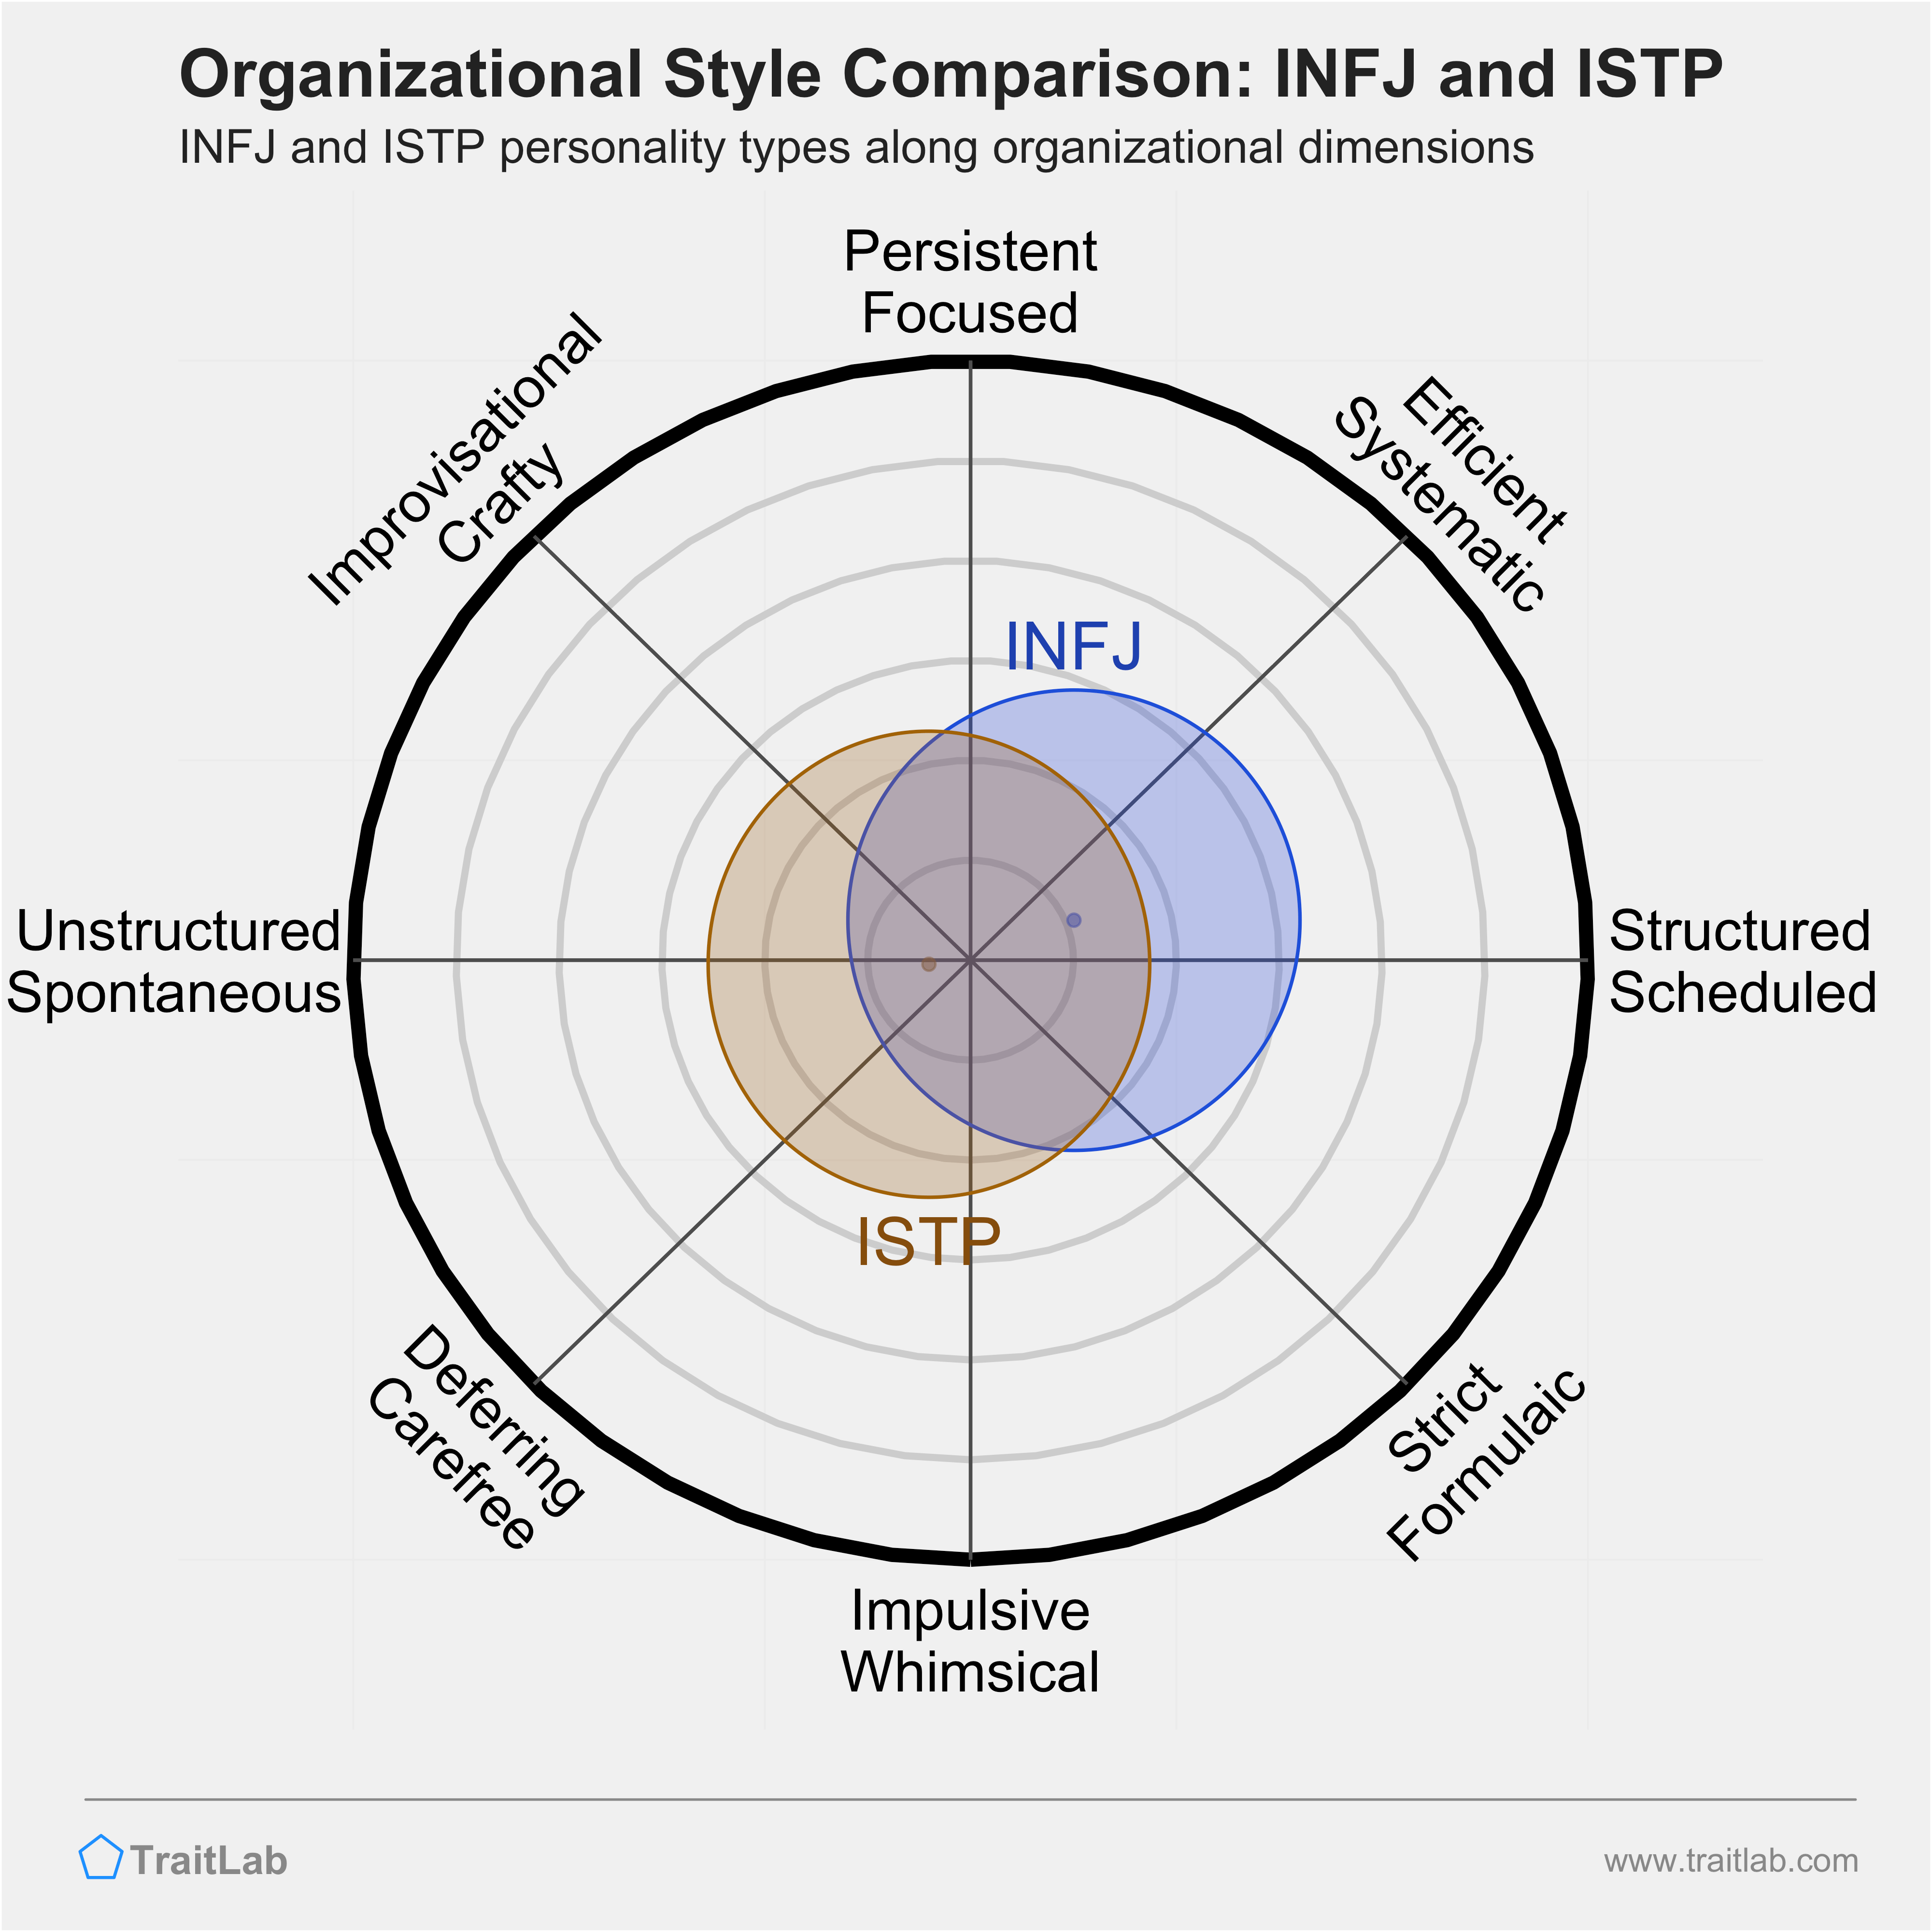 INFJ and ISTP comparison across organizational dimensions